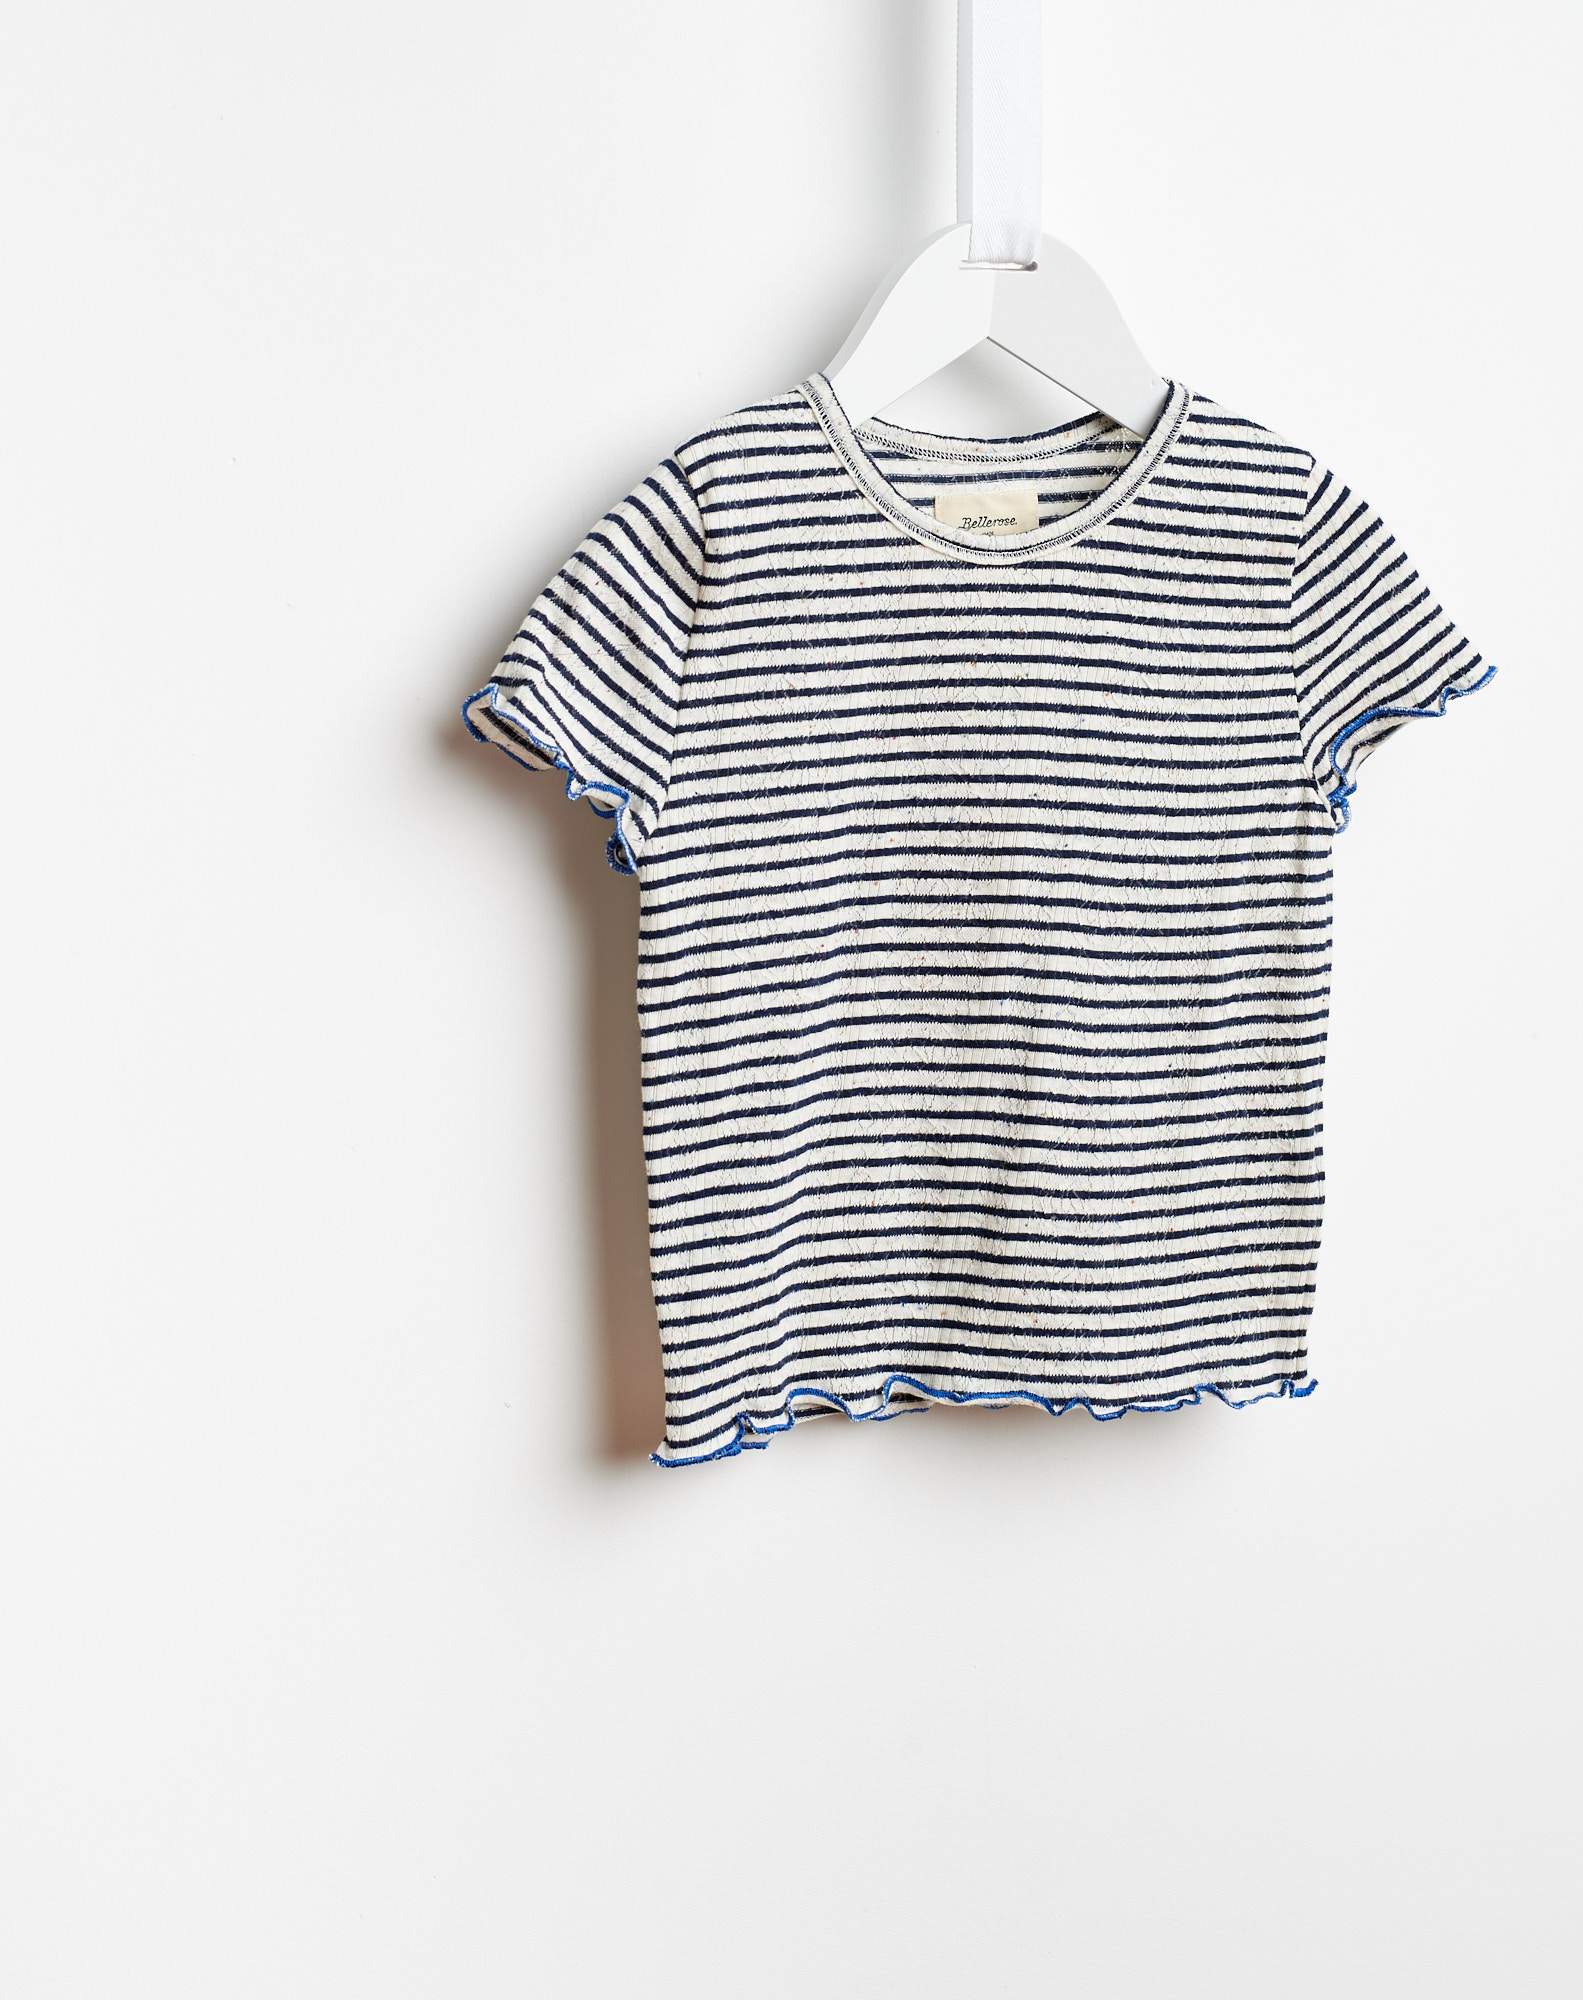 The Stylists’ favorite Bellerose outfits for their kids this summer ...